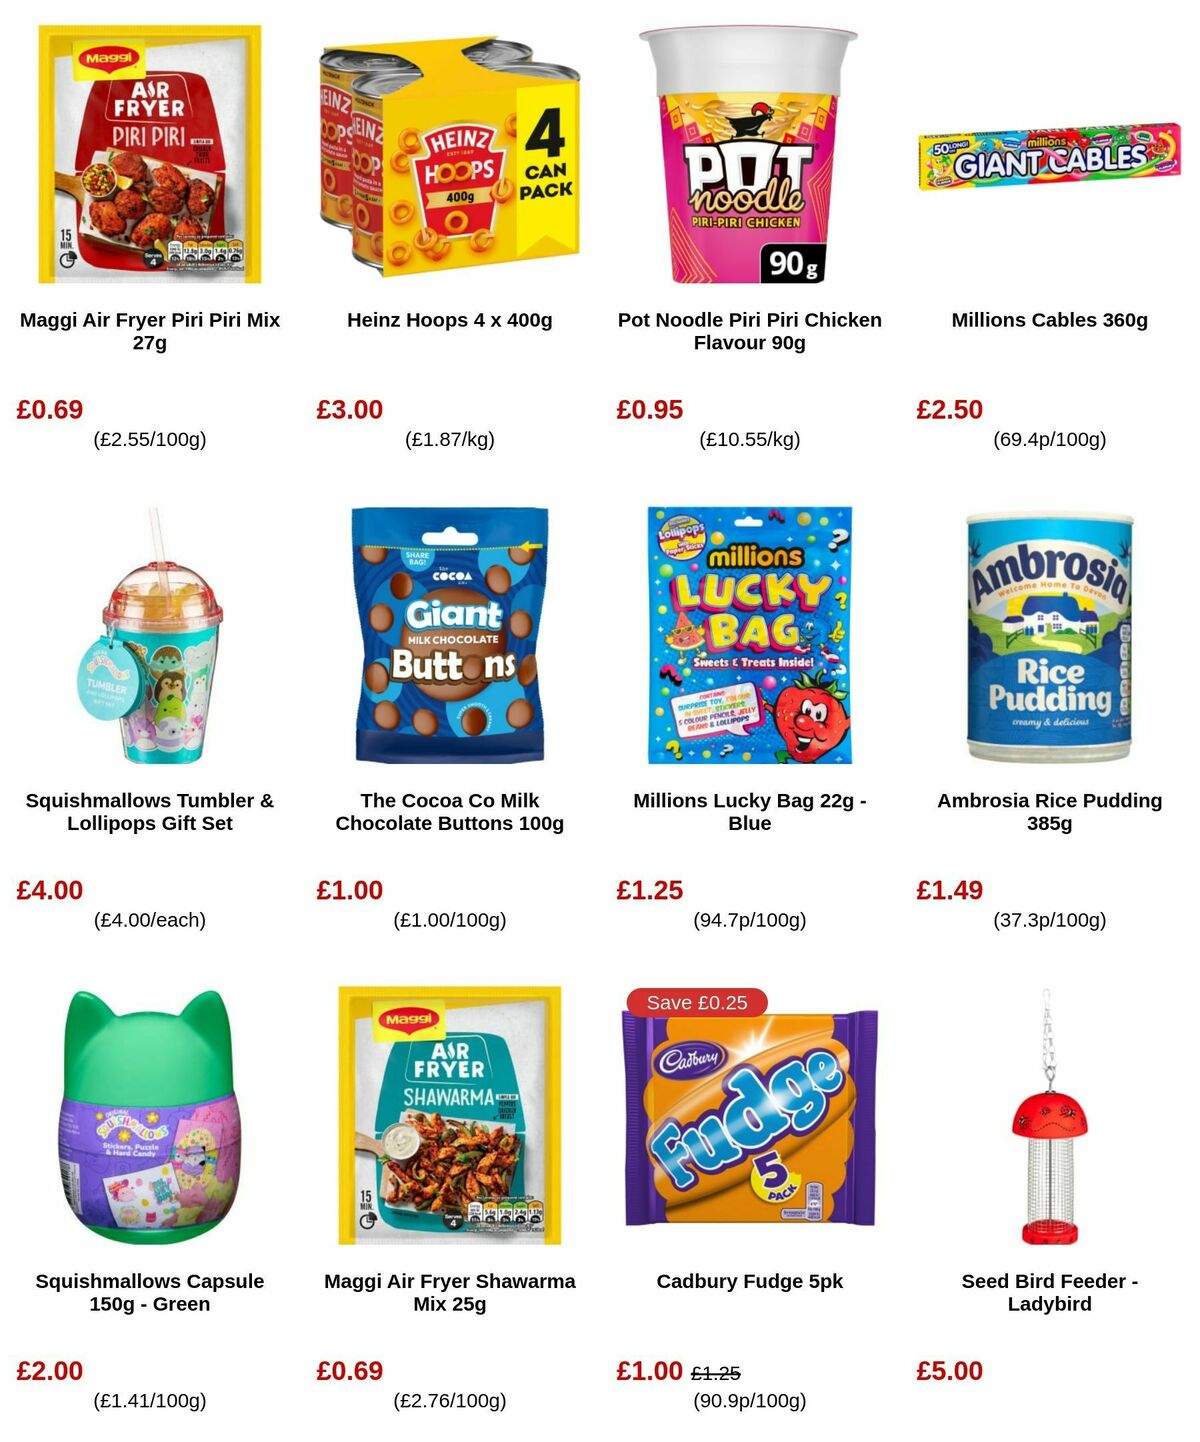 B&M WOW Deals Offers from 30 January